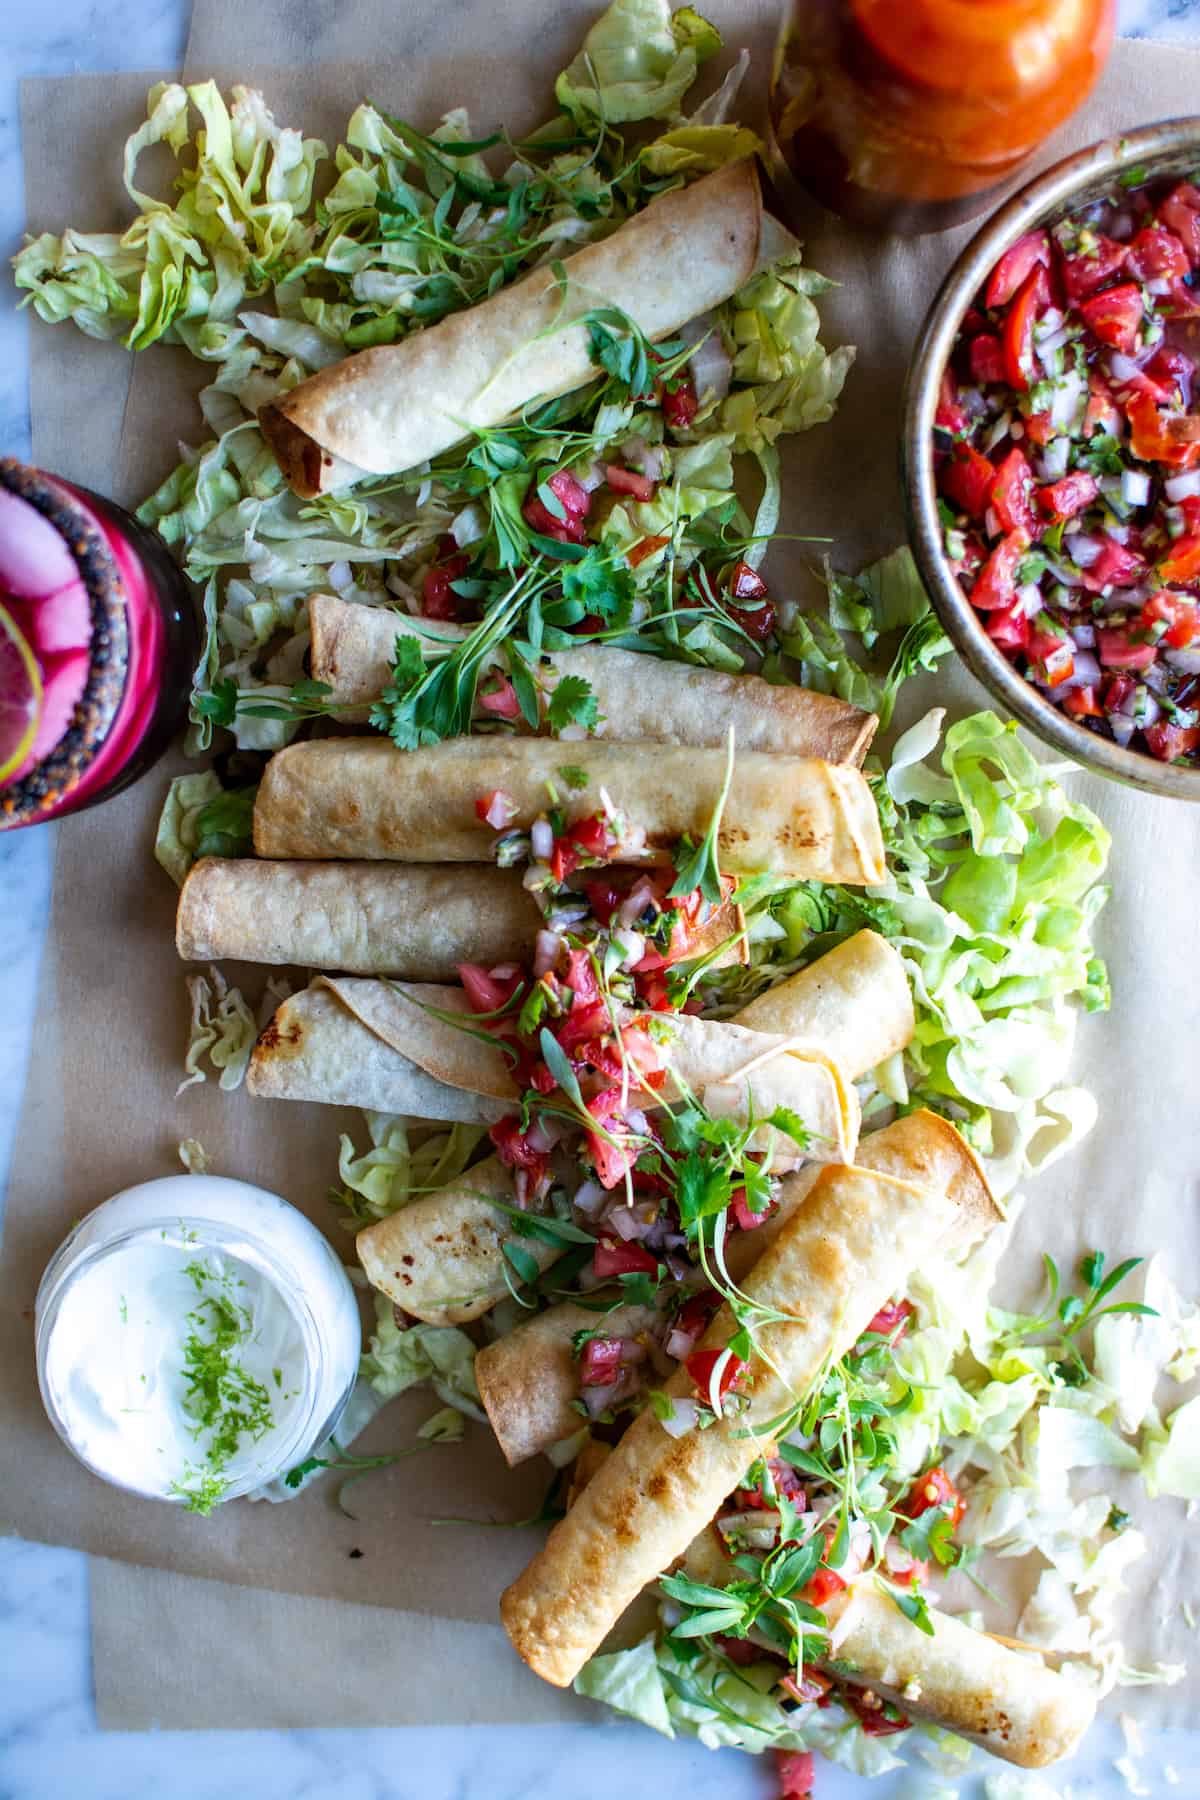 These plant-based taquitos are a real crowd pleaser! Made with sautéed poblano peppers, sweet corn, and creamy queso fresco. Pan-fried, baked, or air-fried they are delicious anyway you cook them. Instructions for all three methods included. #holajalapeno #taquitos #plantbased #flautas